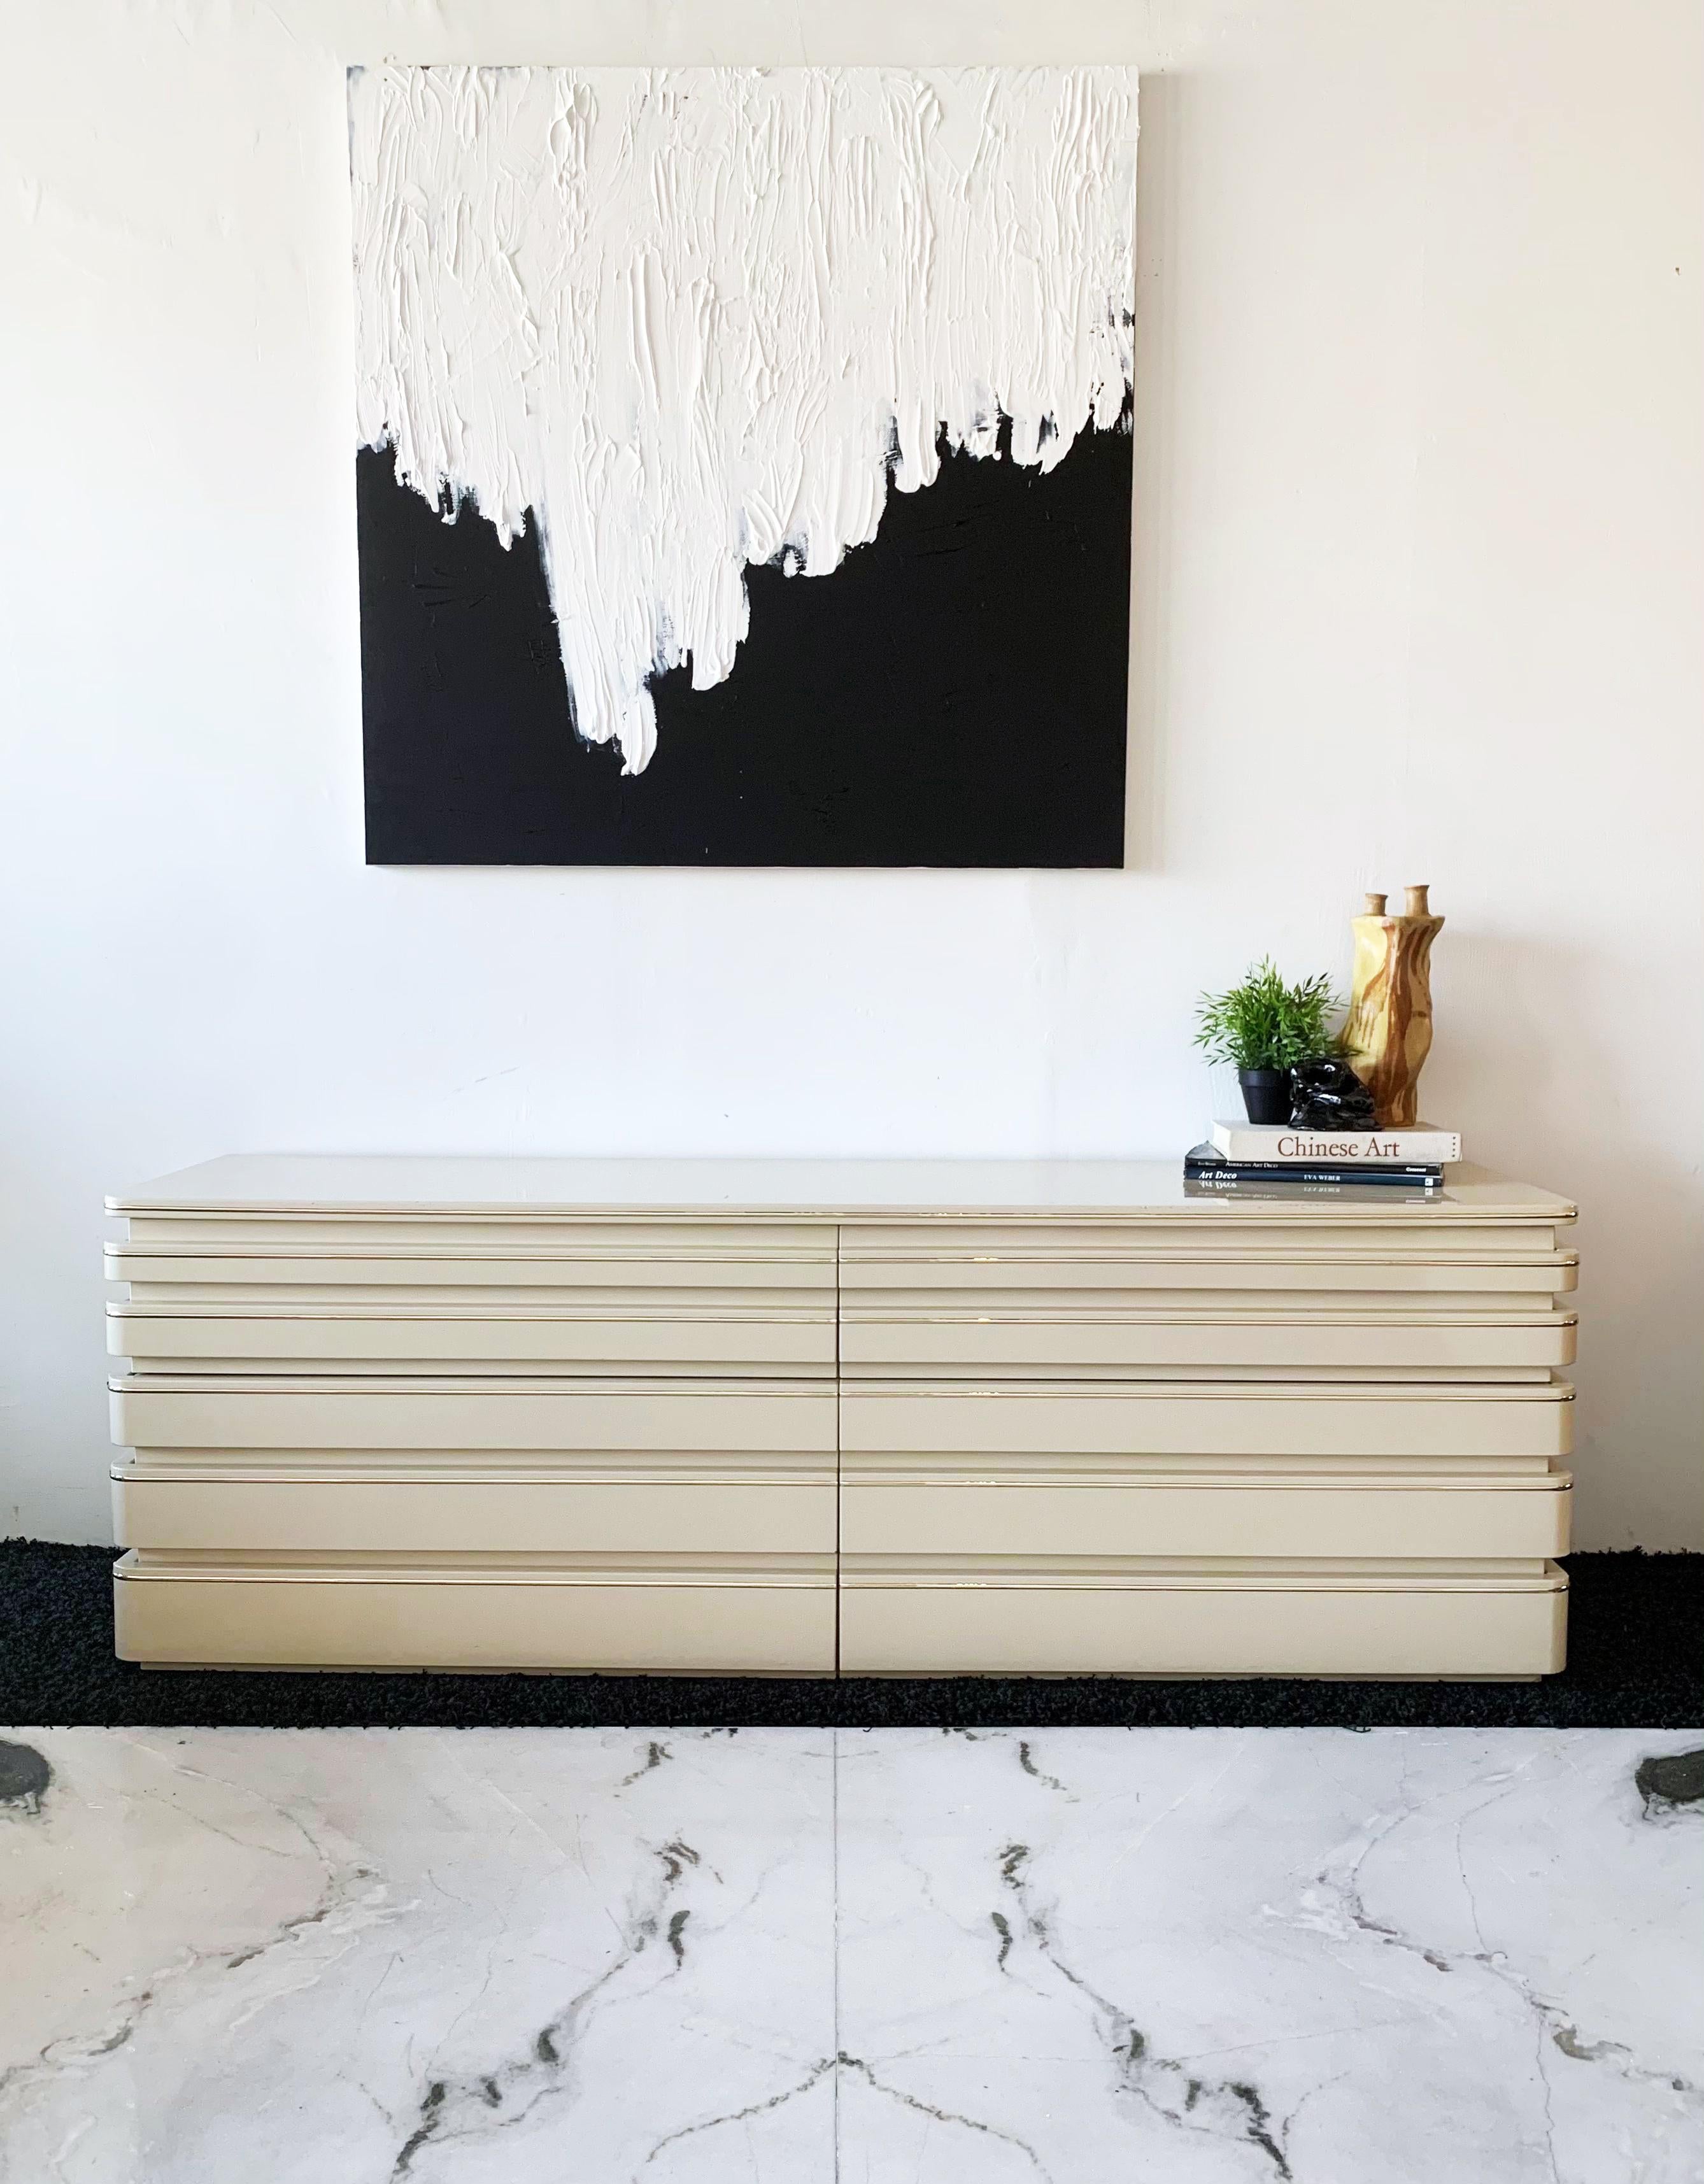 Available right now I have this stunning post modern cream lacquered sideboard or dresser by Roger Rougier. This Rougier sideboard features brass piping / detailing as well as a brass plinth / platform along the bottom of the piece.

This piece